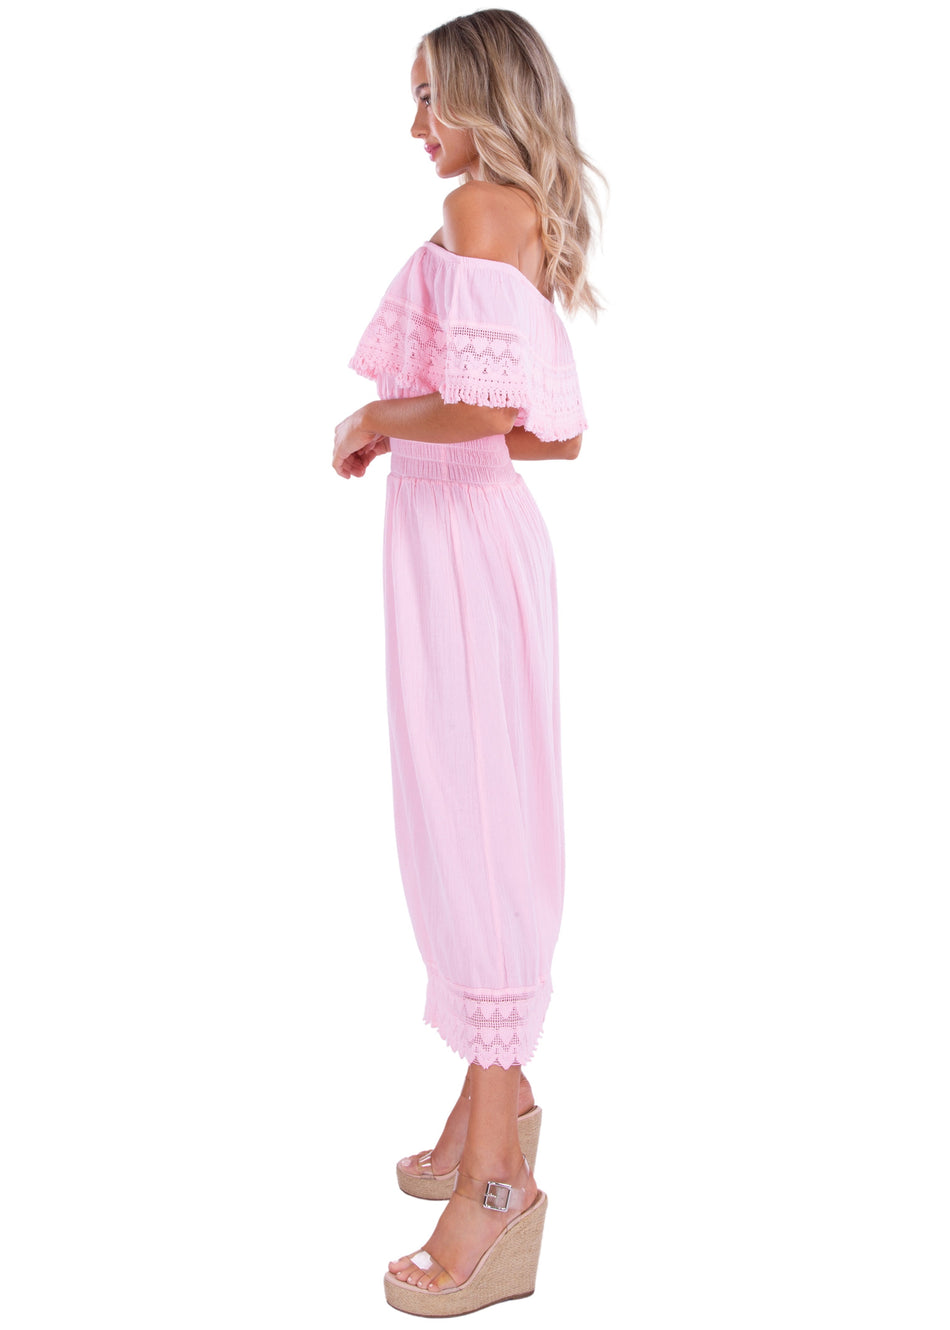 NW1079 - Baby Pink Cotton Dress